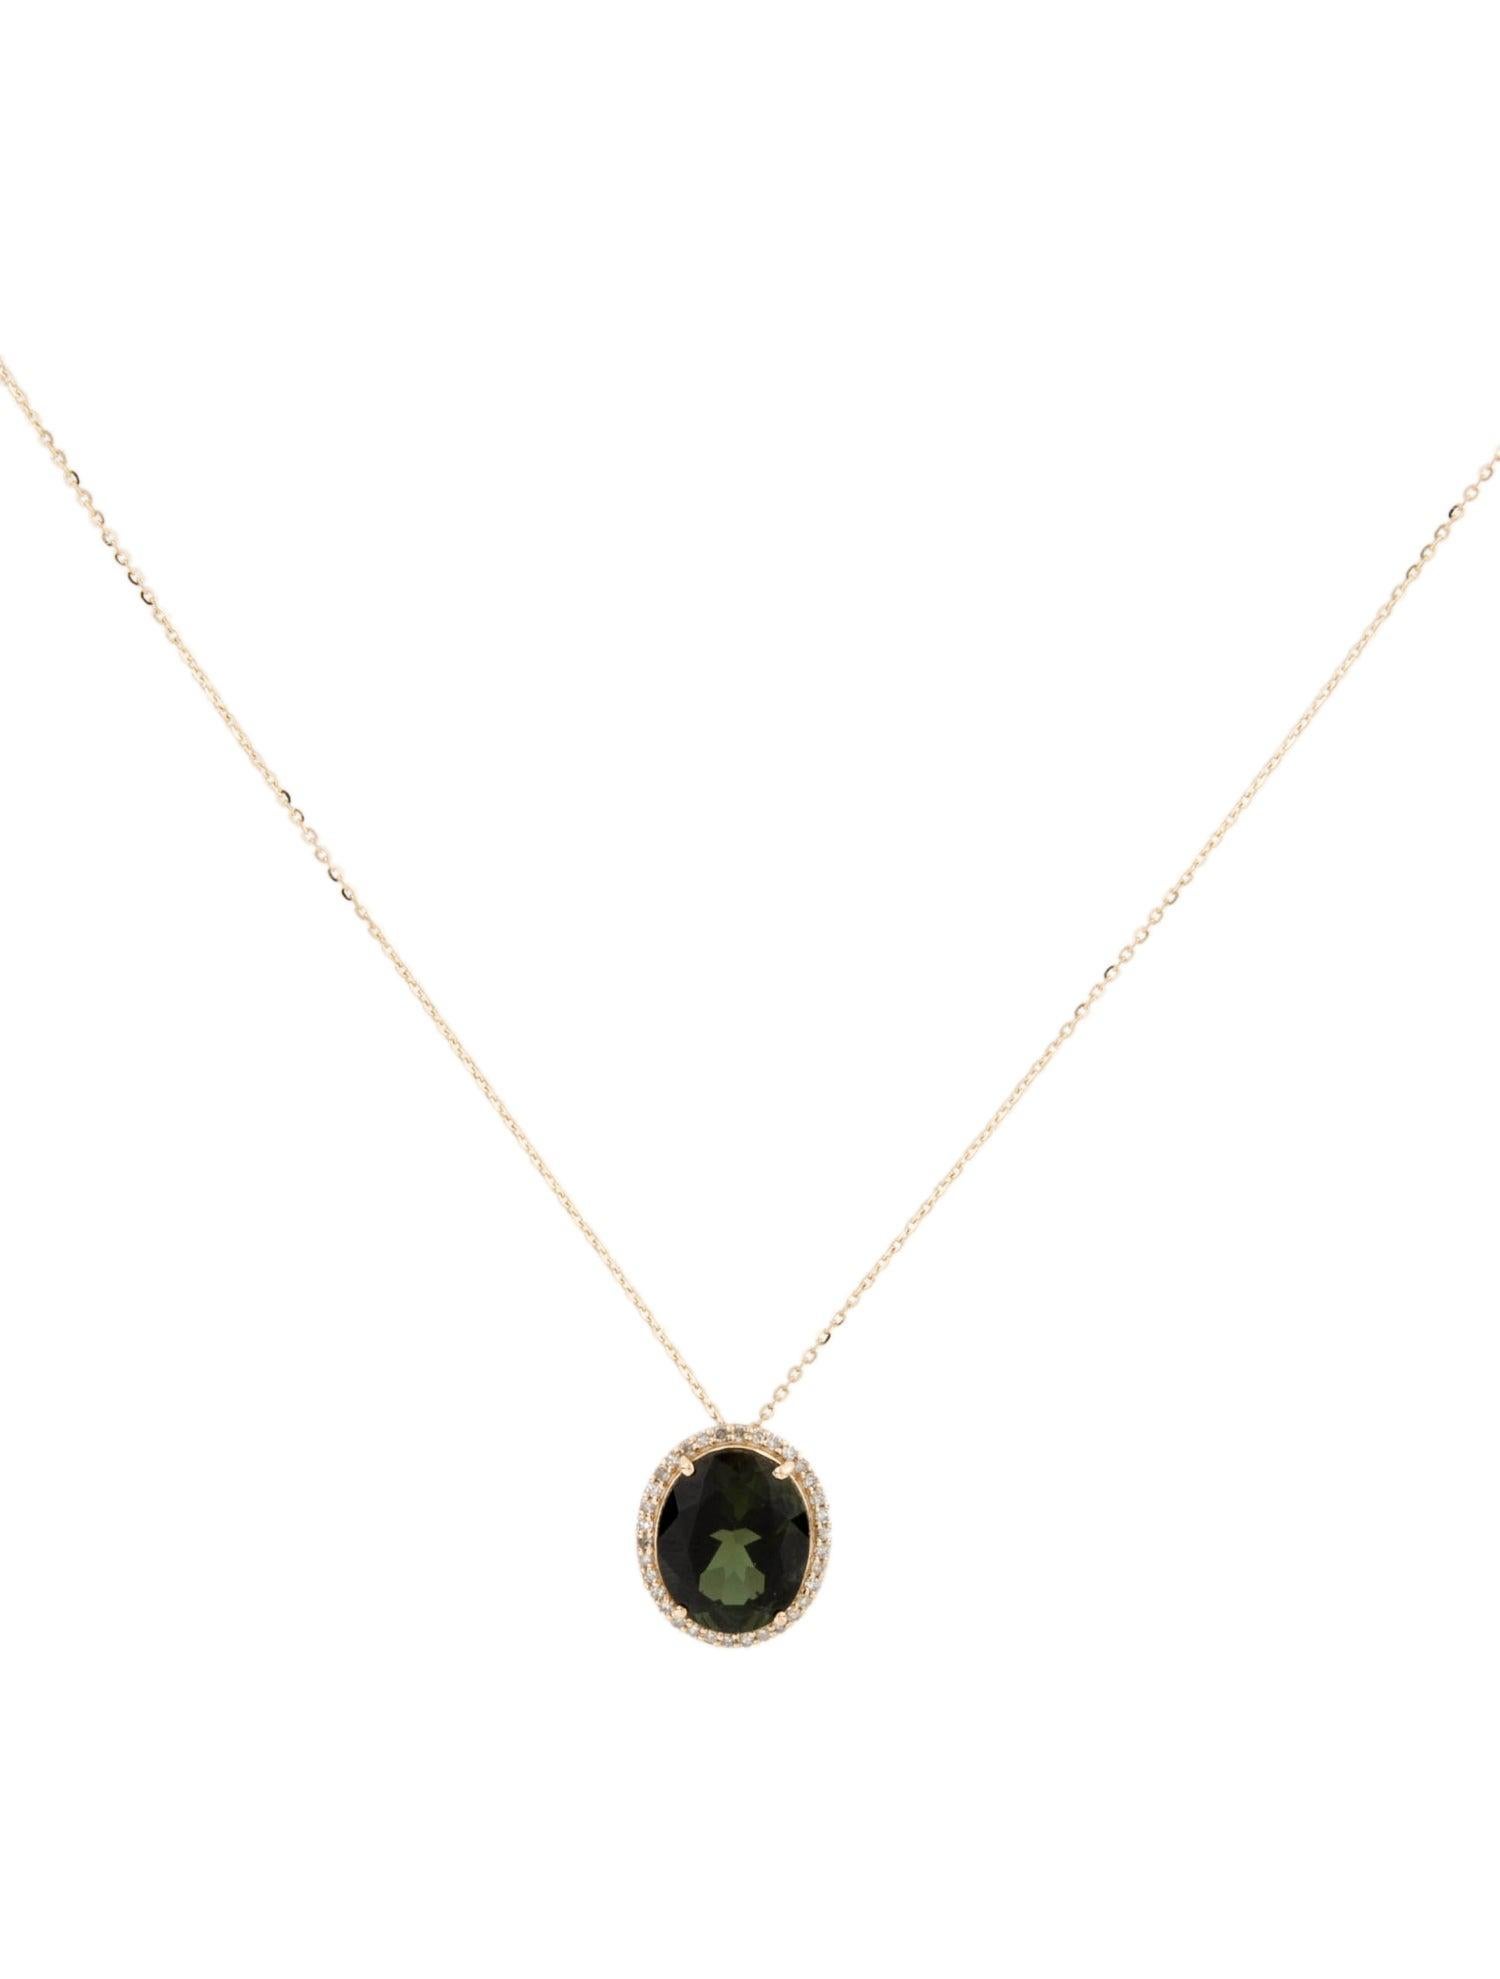 14K Tourmaline & Diamond Pendant Necklace - Exquisite Gemstone Jewelry Statement In New Condition For Sale In Holtsville, NY